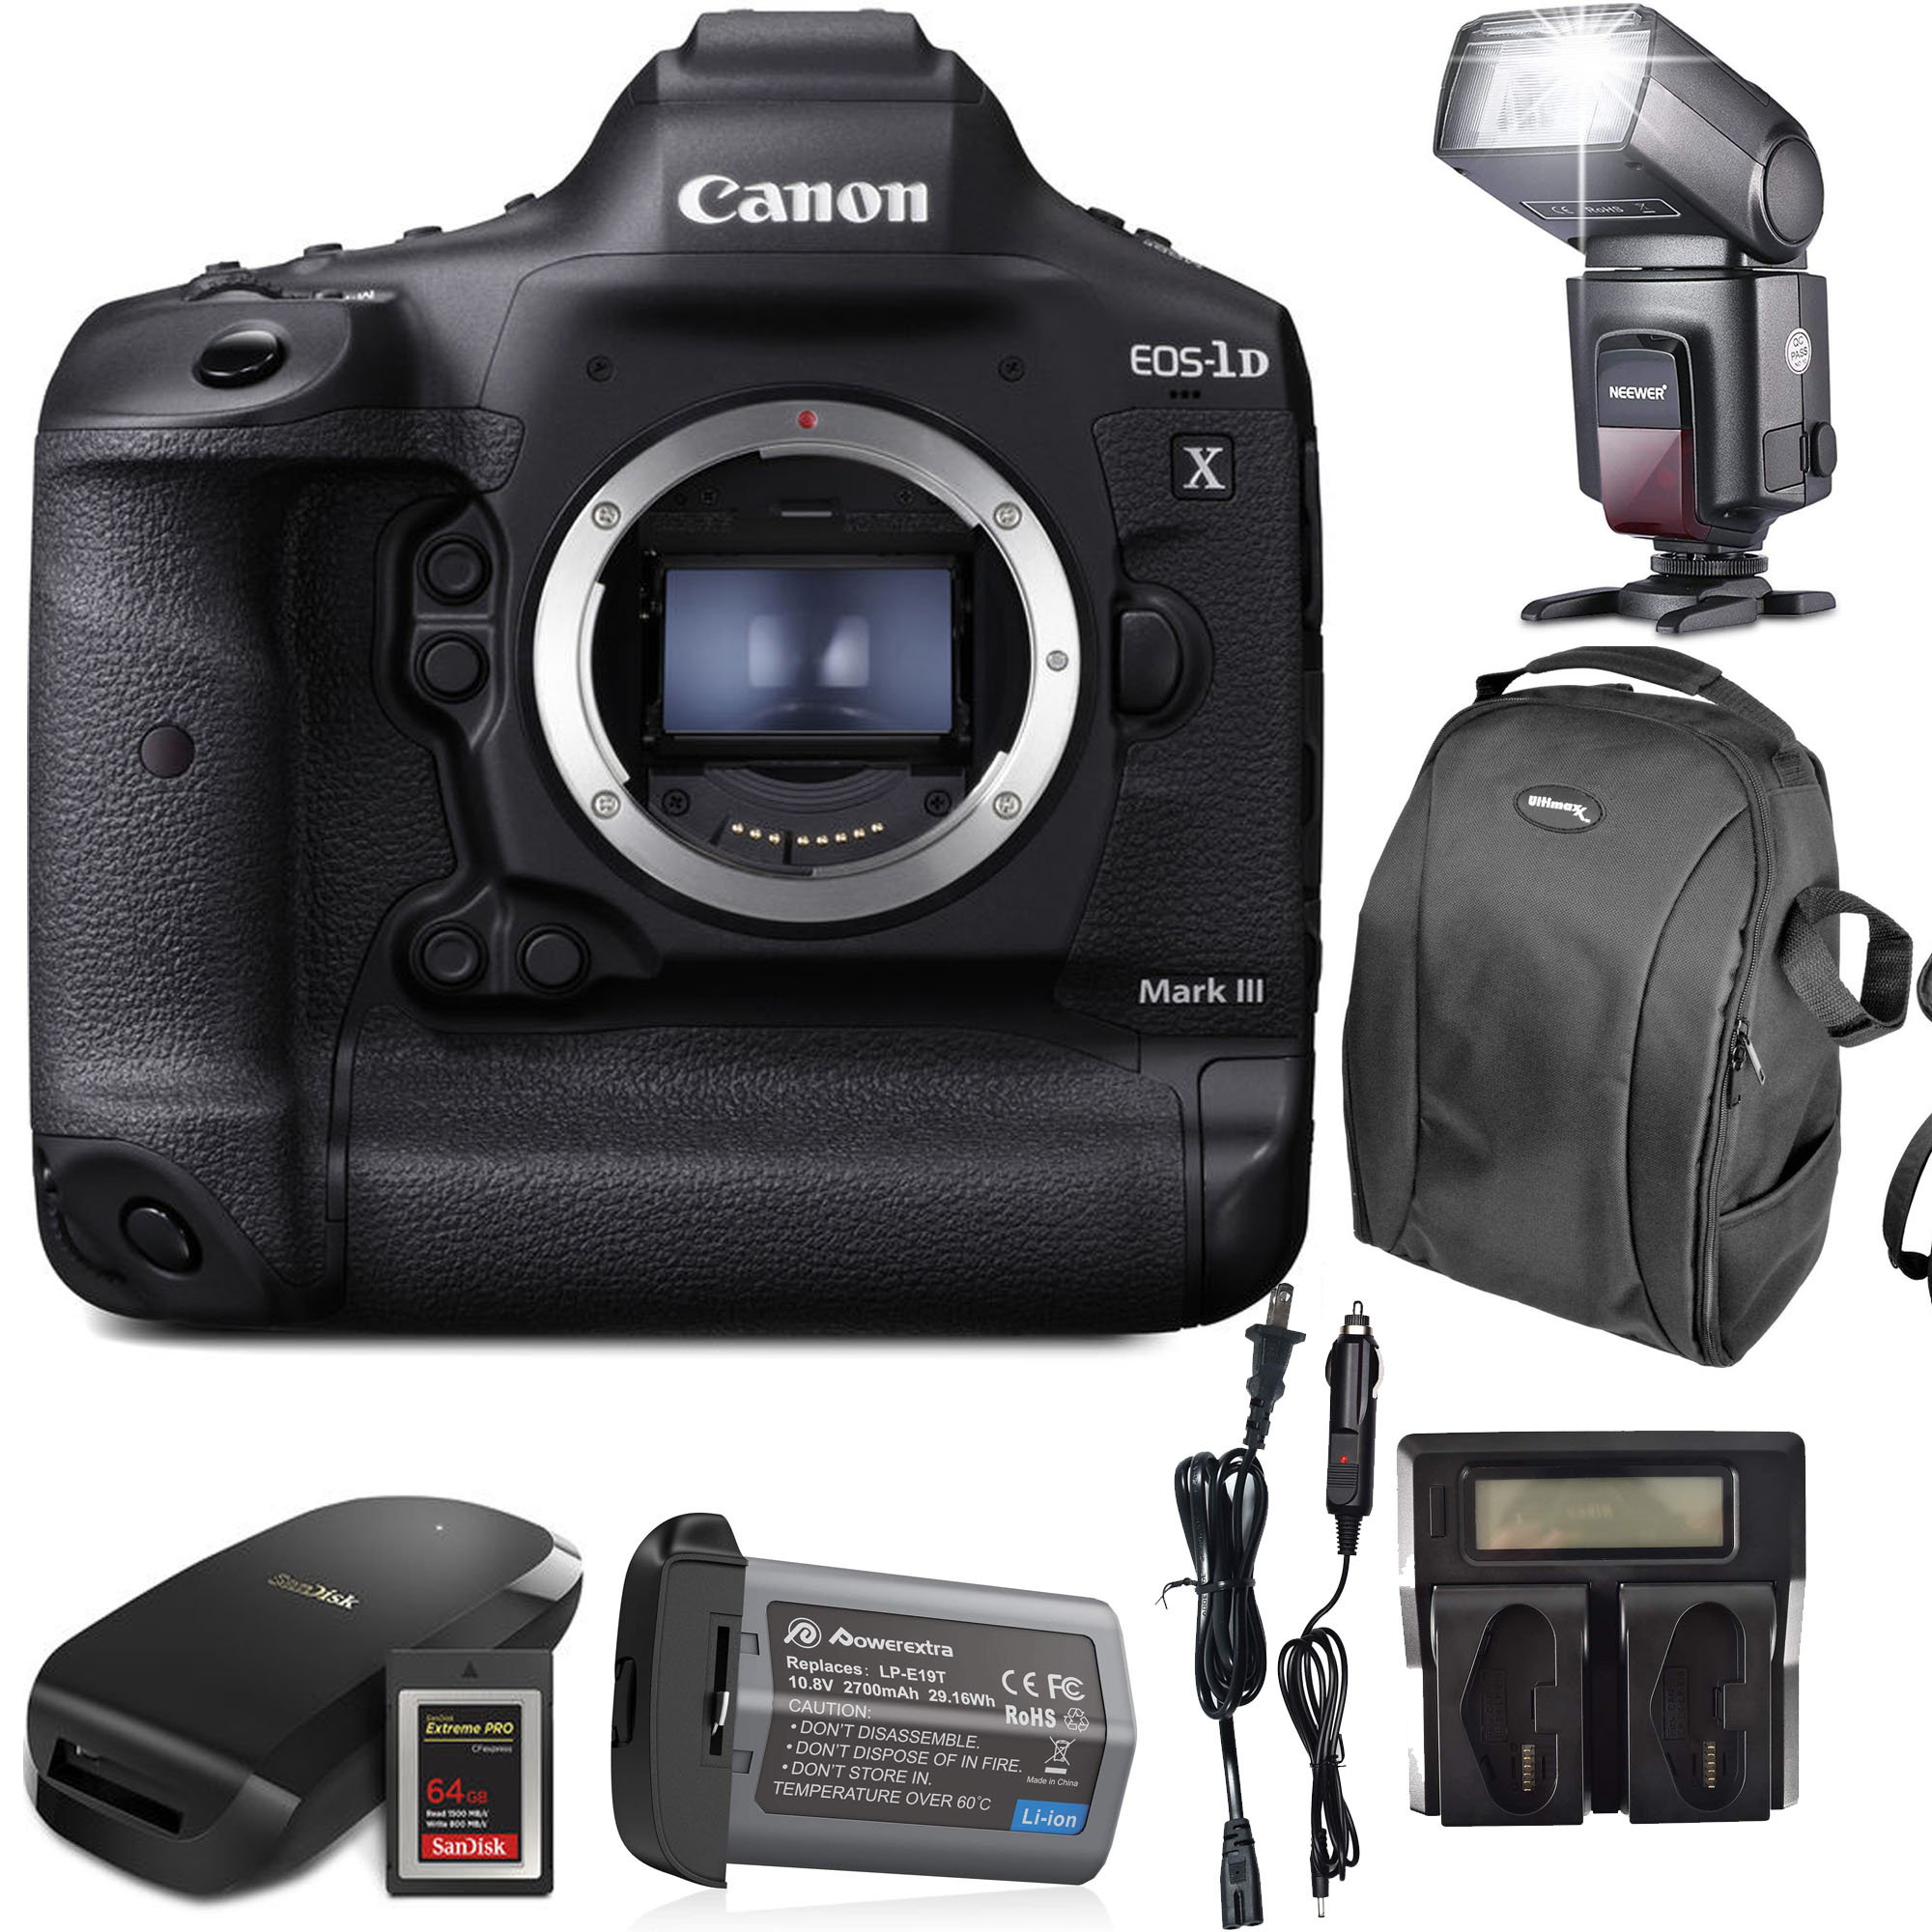 Canon EOS-1D X Mark III DSLR Camera (Body Only) with Sandisk 64GB CFexpress Card | PRO CFexpress Card Reader Starter Package - image 1 of 1